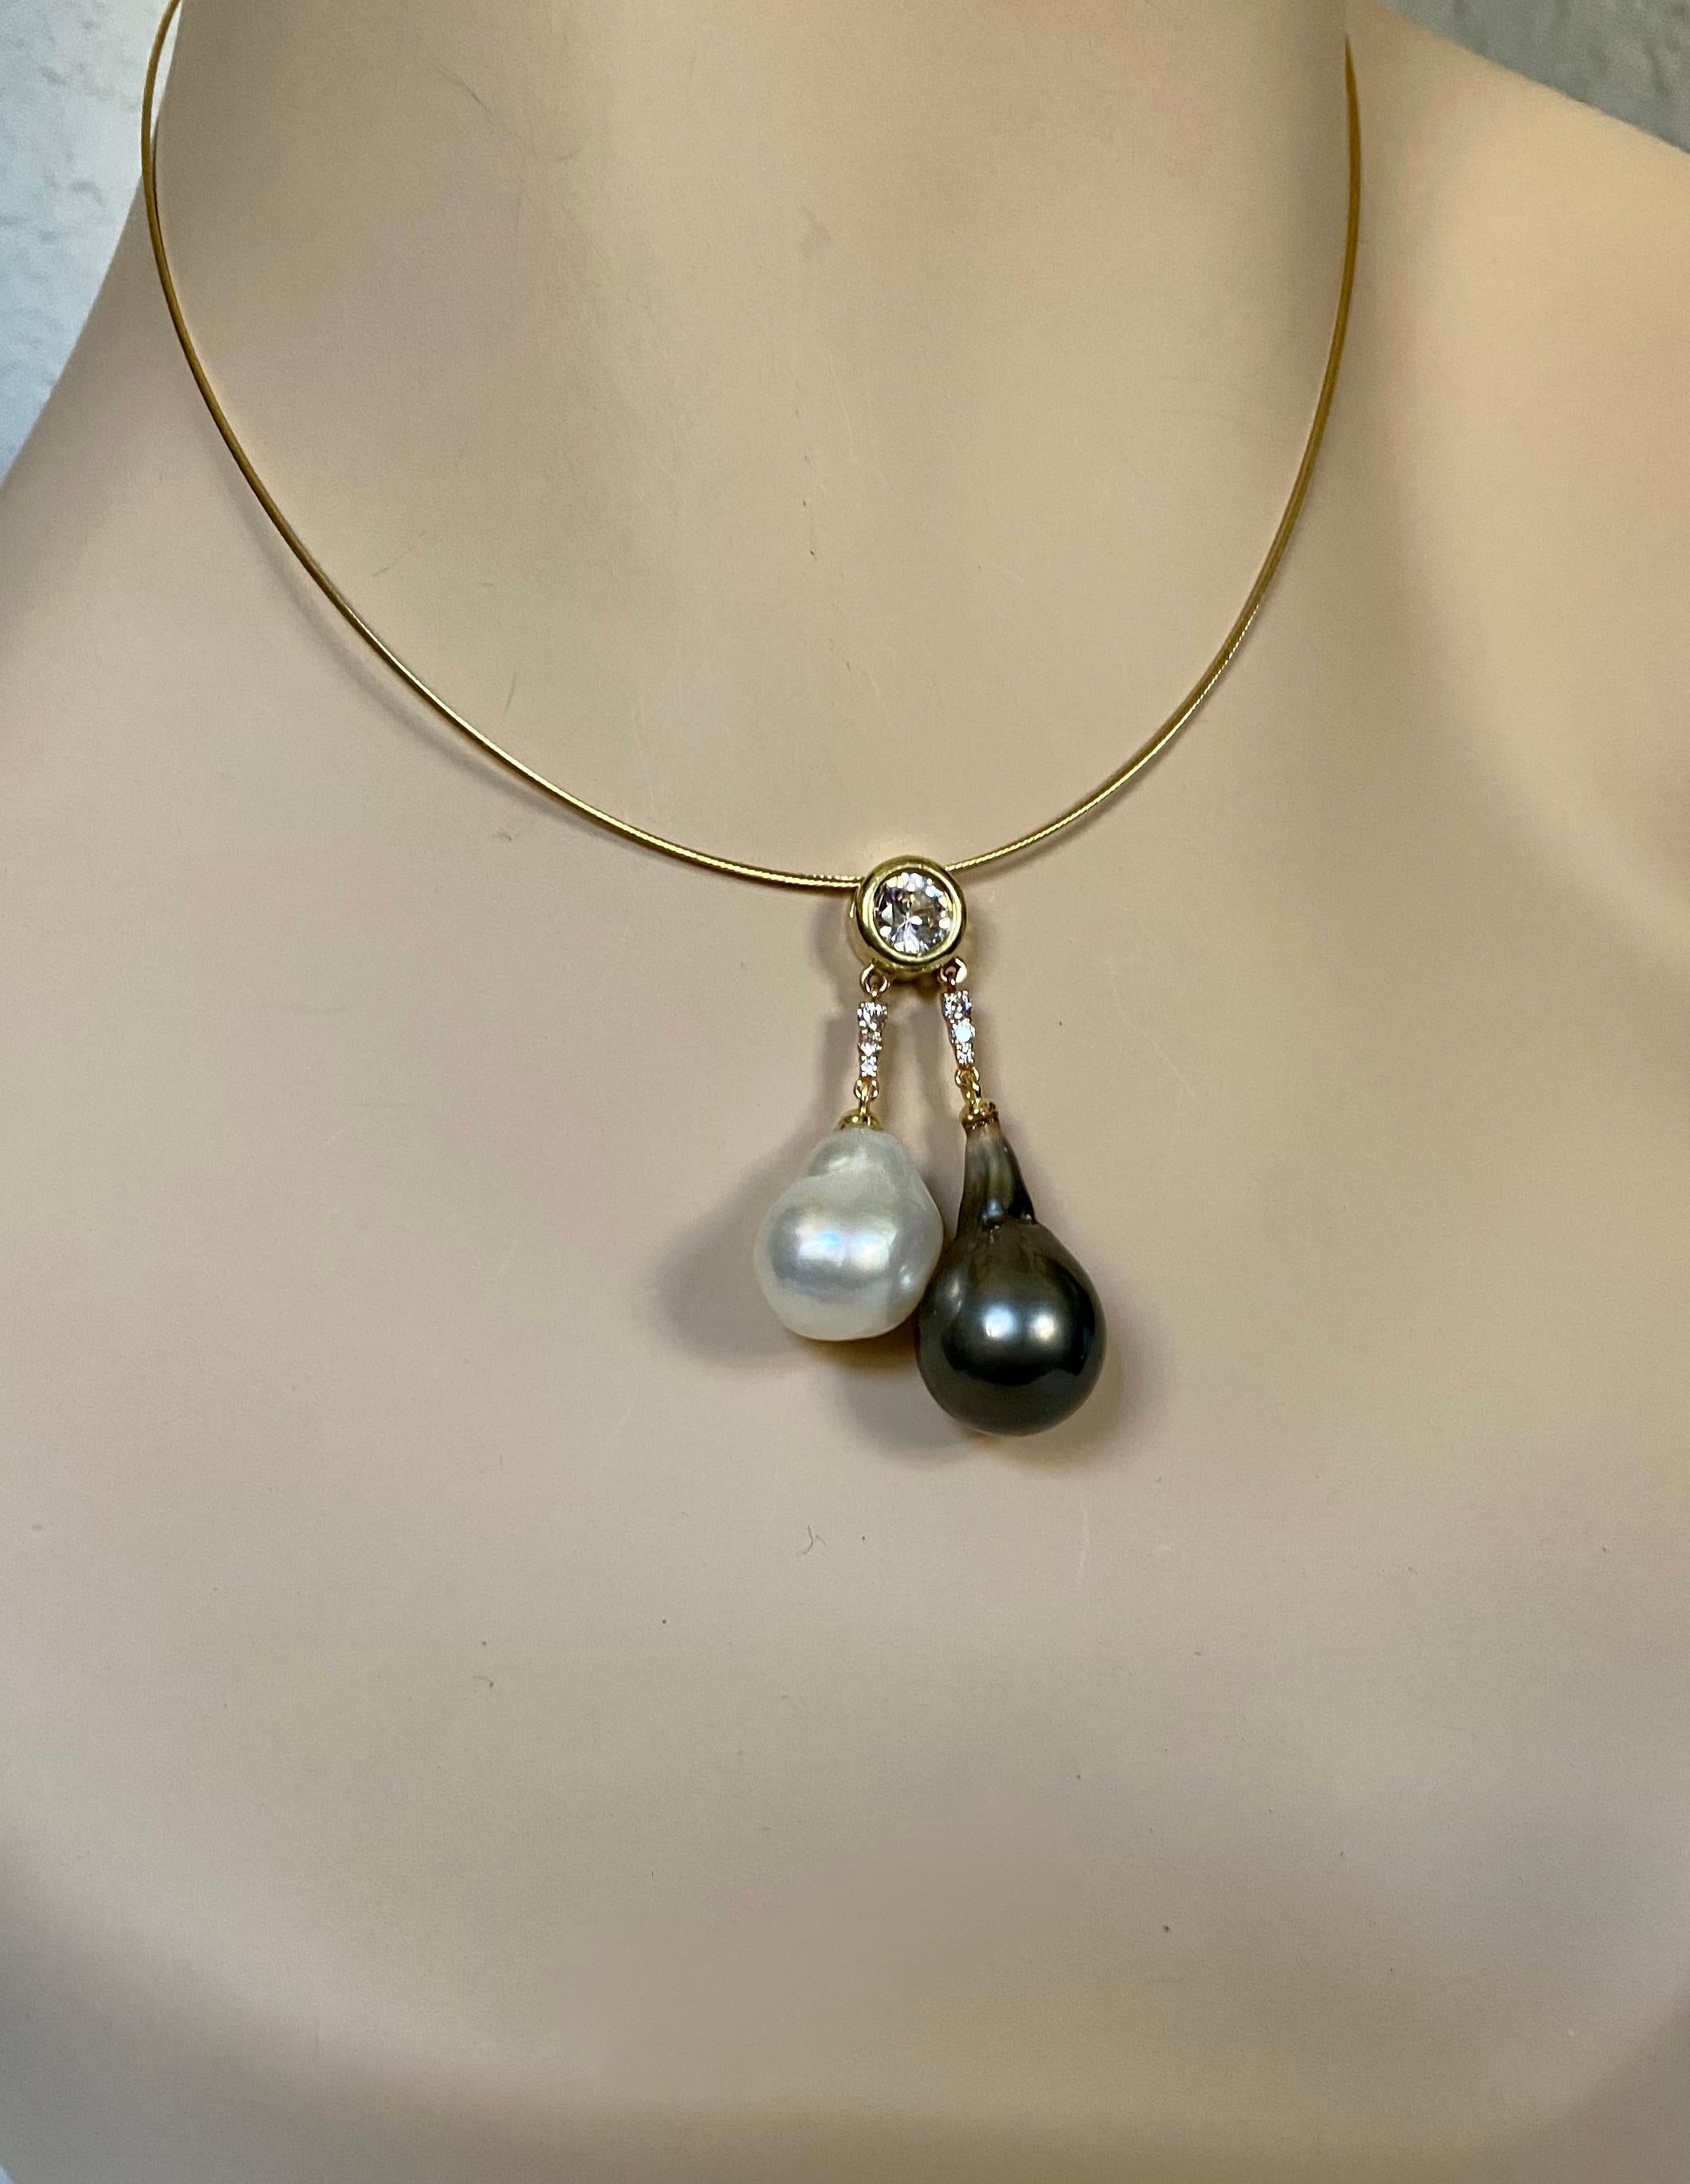 Baroque pearls are featured in this unique drop pendant.  The South Seas pearl is sourced from Paspaley, the largest cultivator of pearls in Australia.  The black pearl is from Tahiti.  Both pearls have rich luster and  though baroque, have blemish